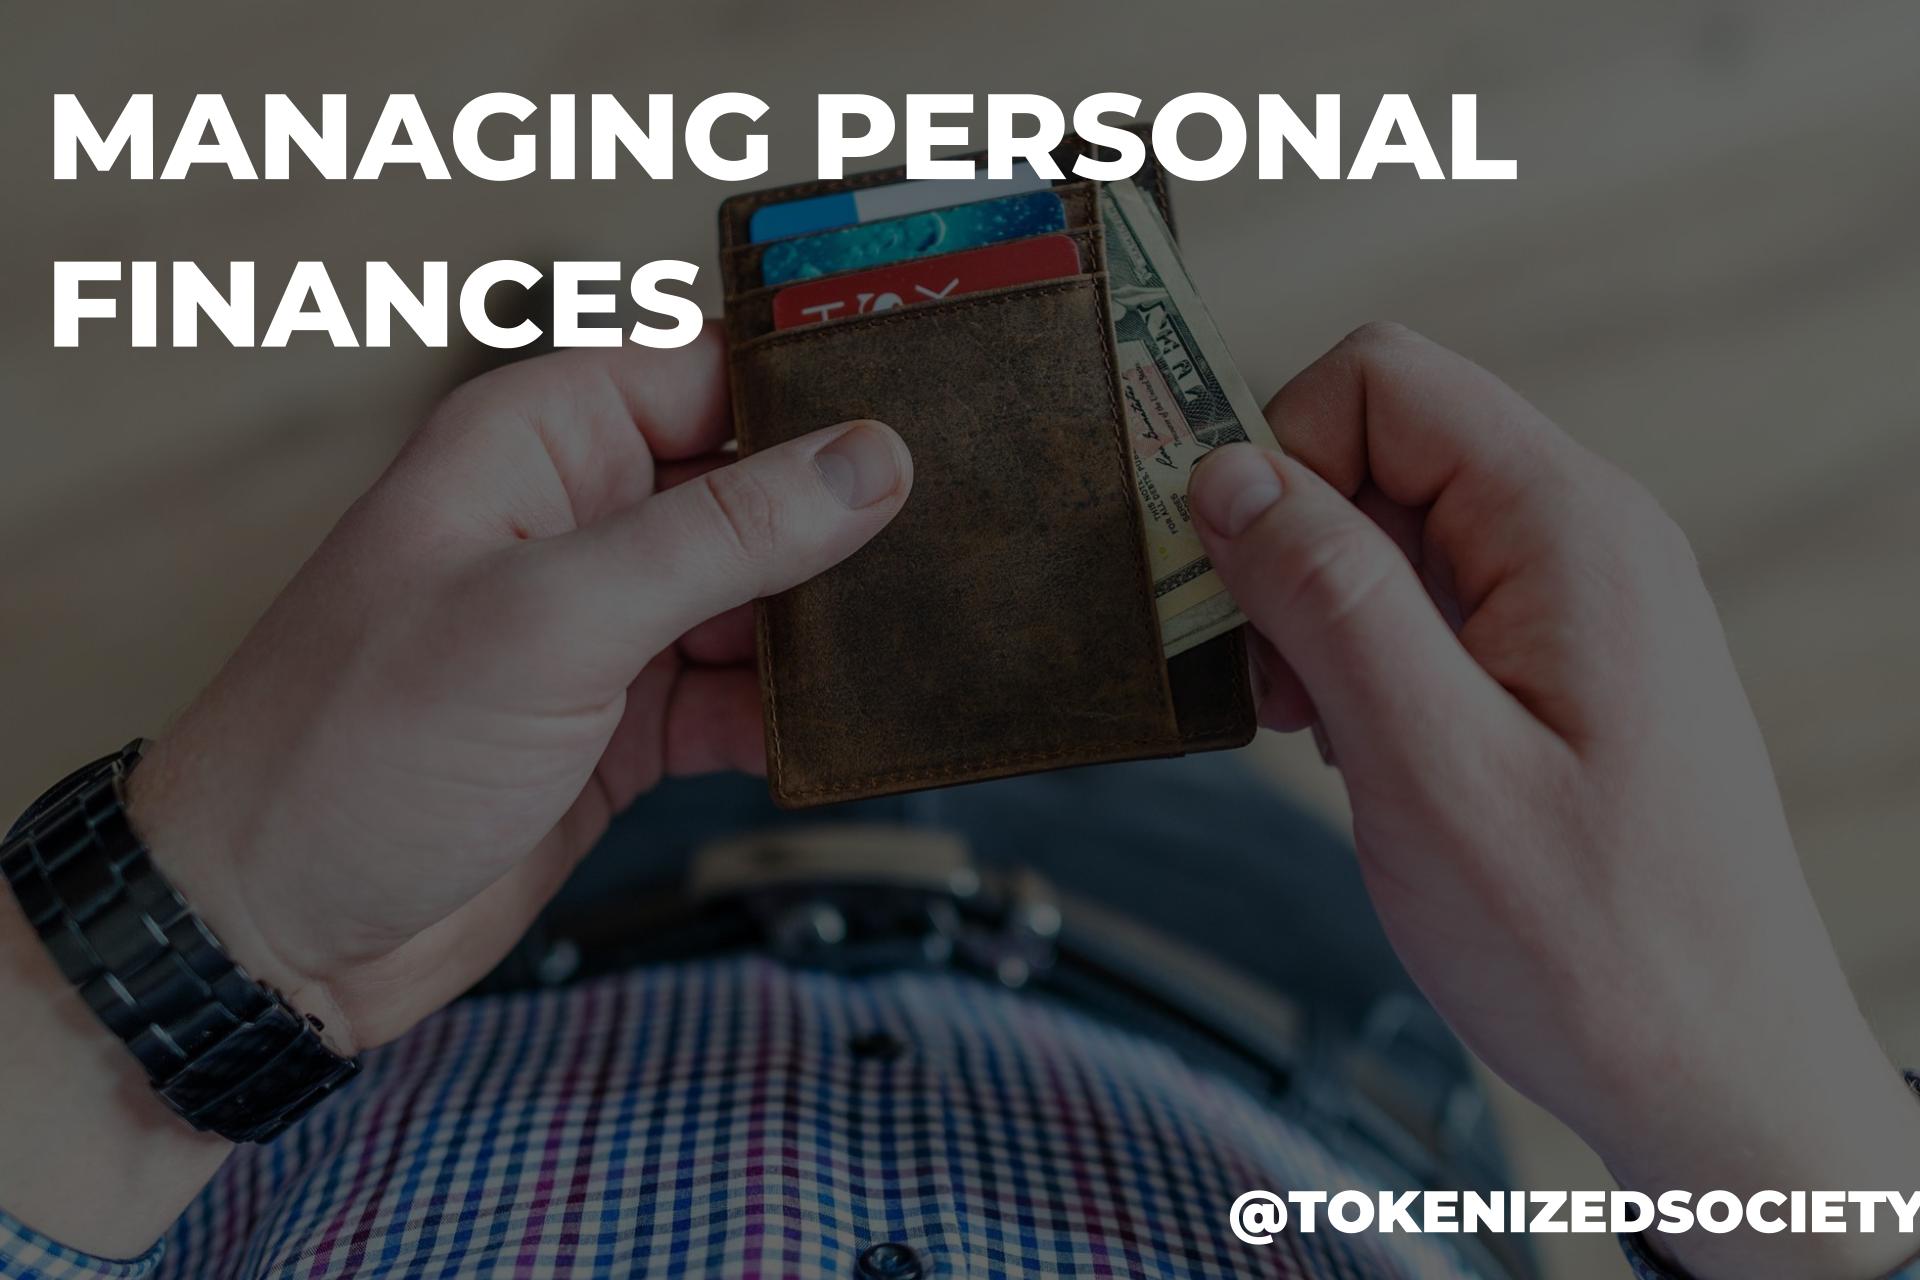 @tokenizedsociety/a-few-tips-on-personal-finances